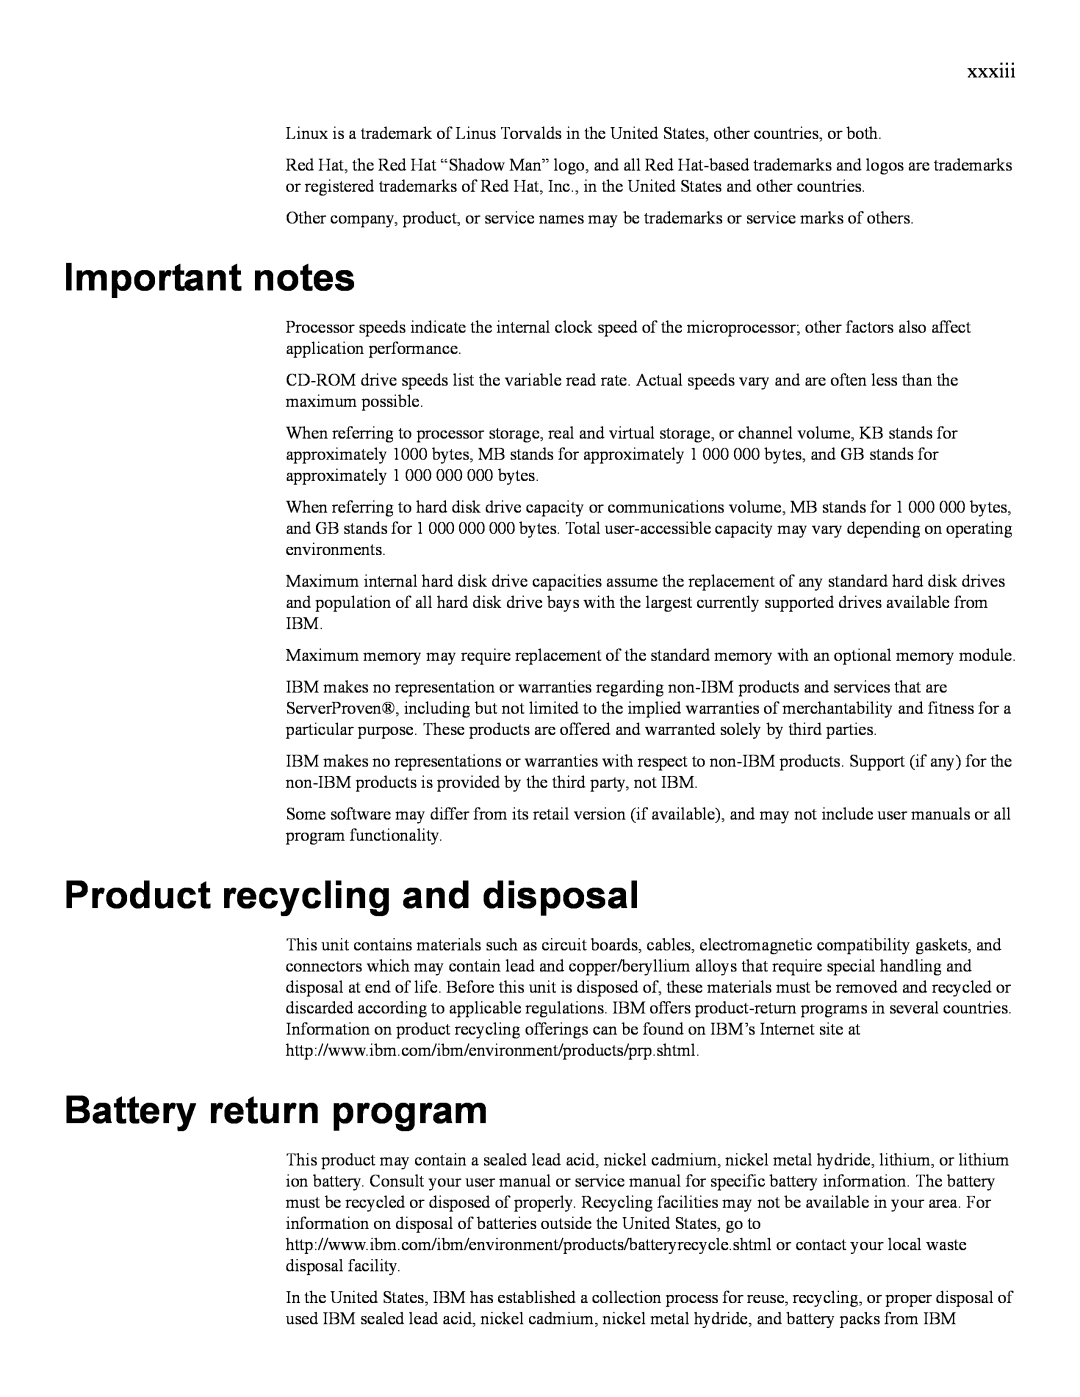 IBM 24R9718 IB manual Important notes, Product recycling and disposal, Battery return program 